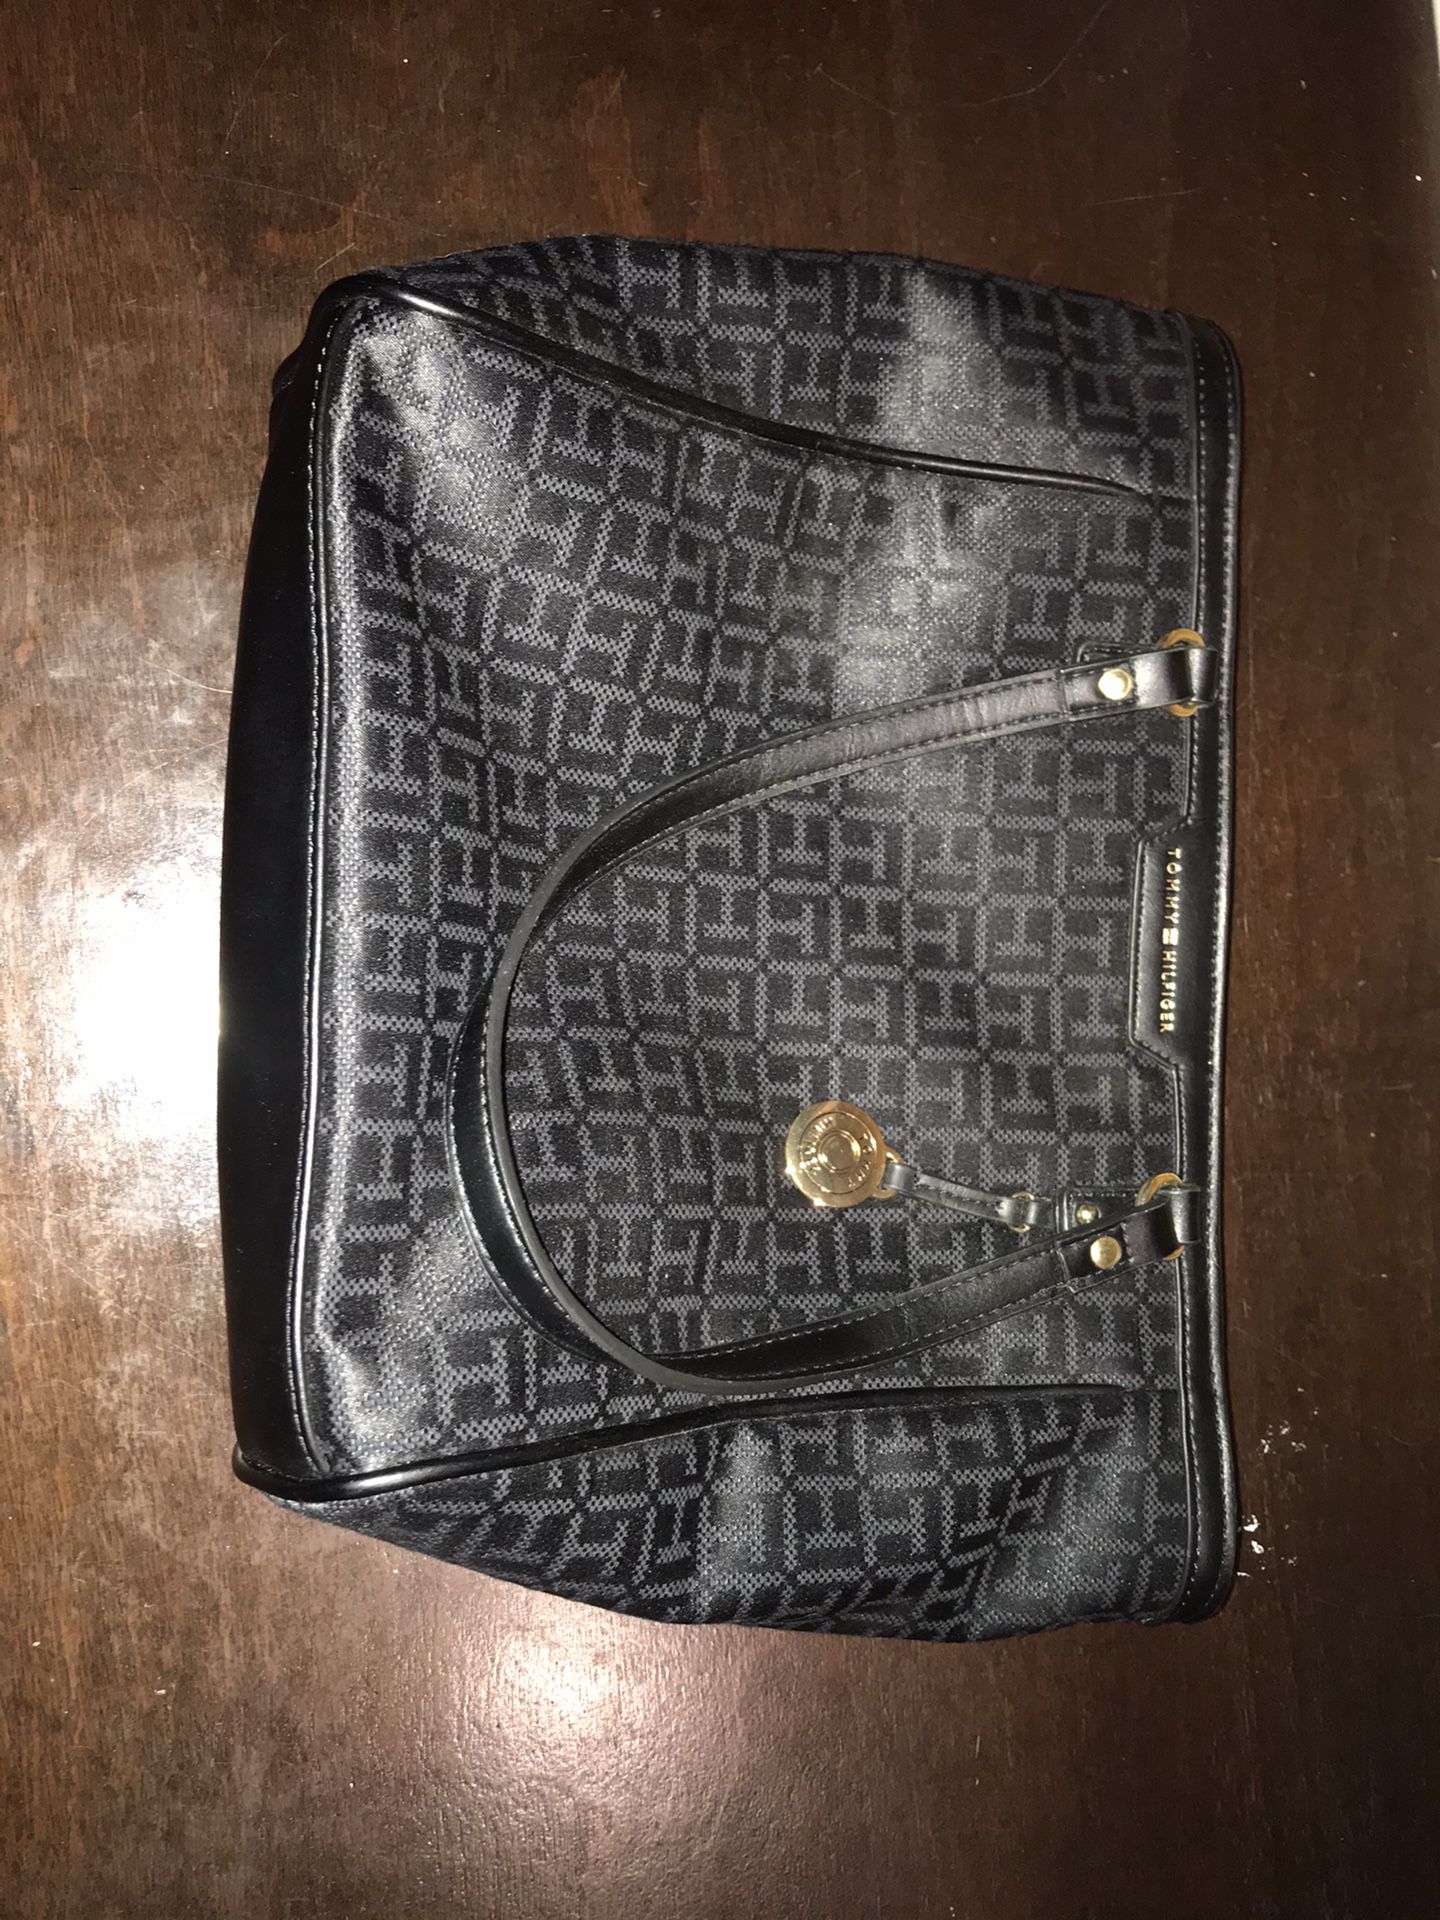 Tommy Hilfiger Hand Purse , New Never Used